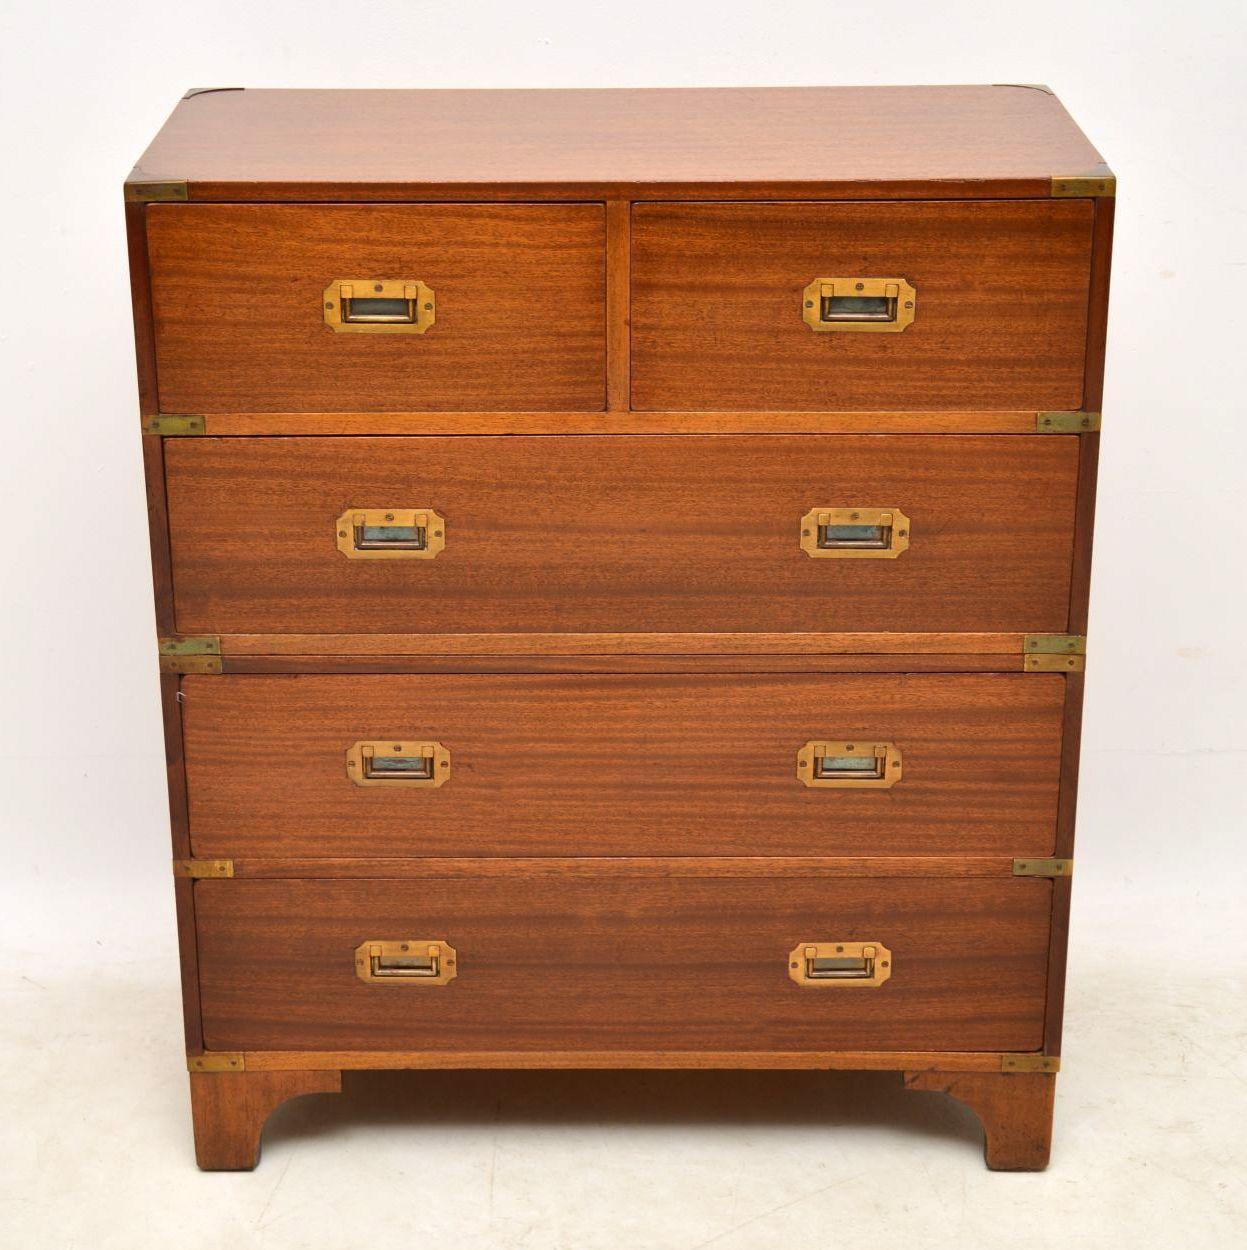 Antique mahogany Campaign style chest of drawers in excellent condition having just been French polished and dating from around the 1950s period. It has brass corner edges and brass sunken military handles. This chest comes apart into two sections